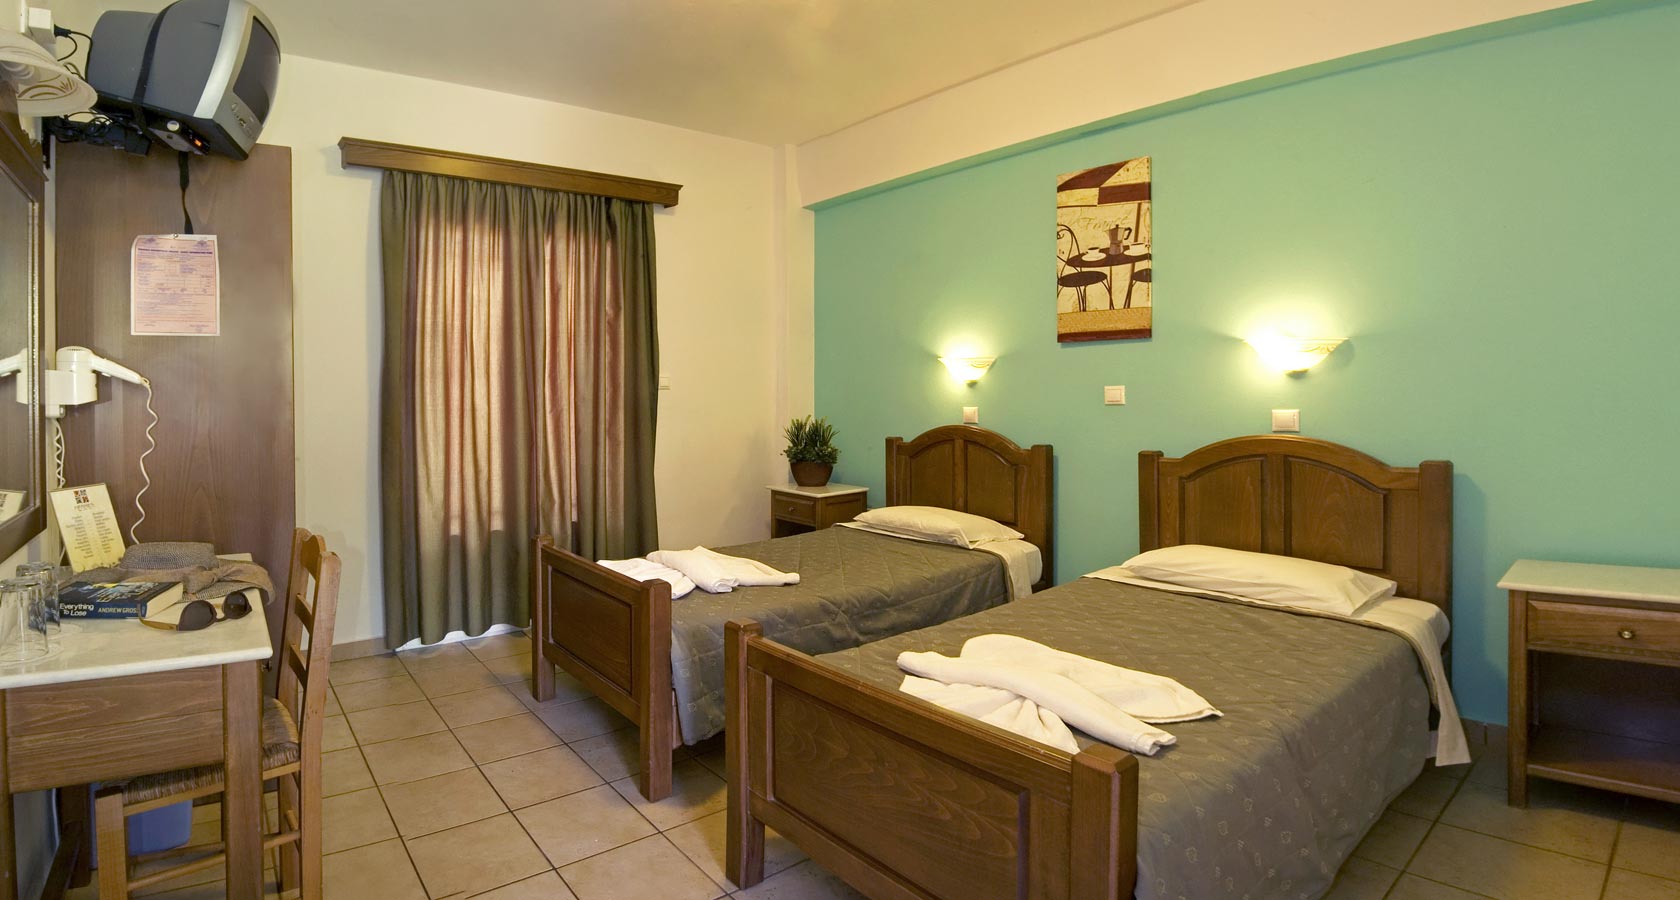 Room of Hermes Hotel in island Greece - Ios Accommodation